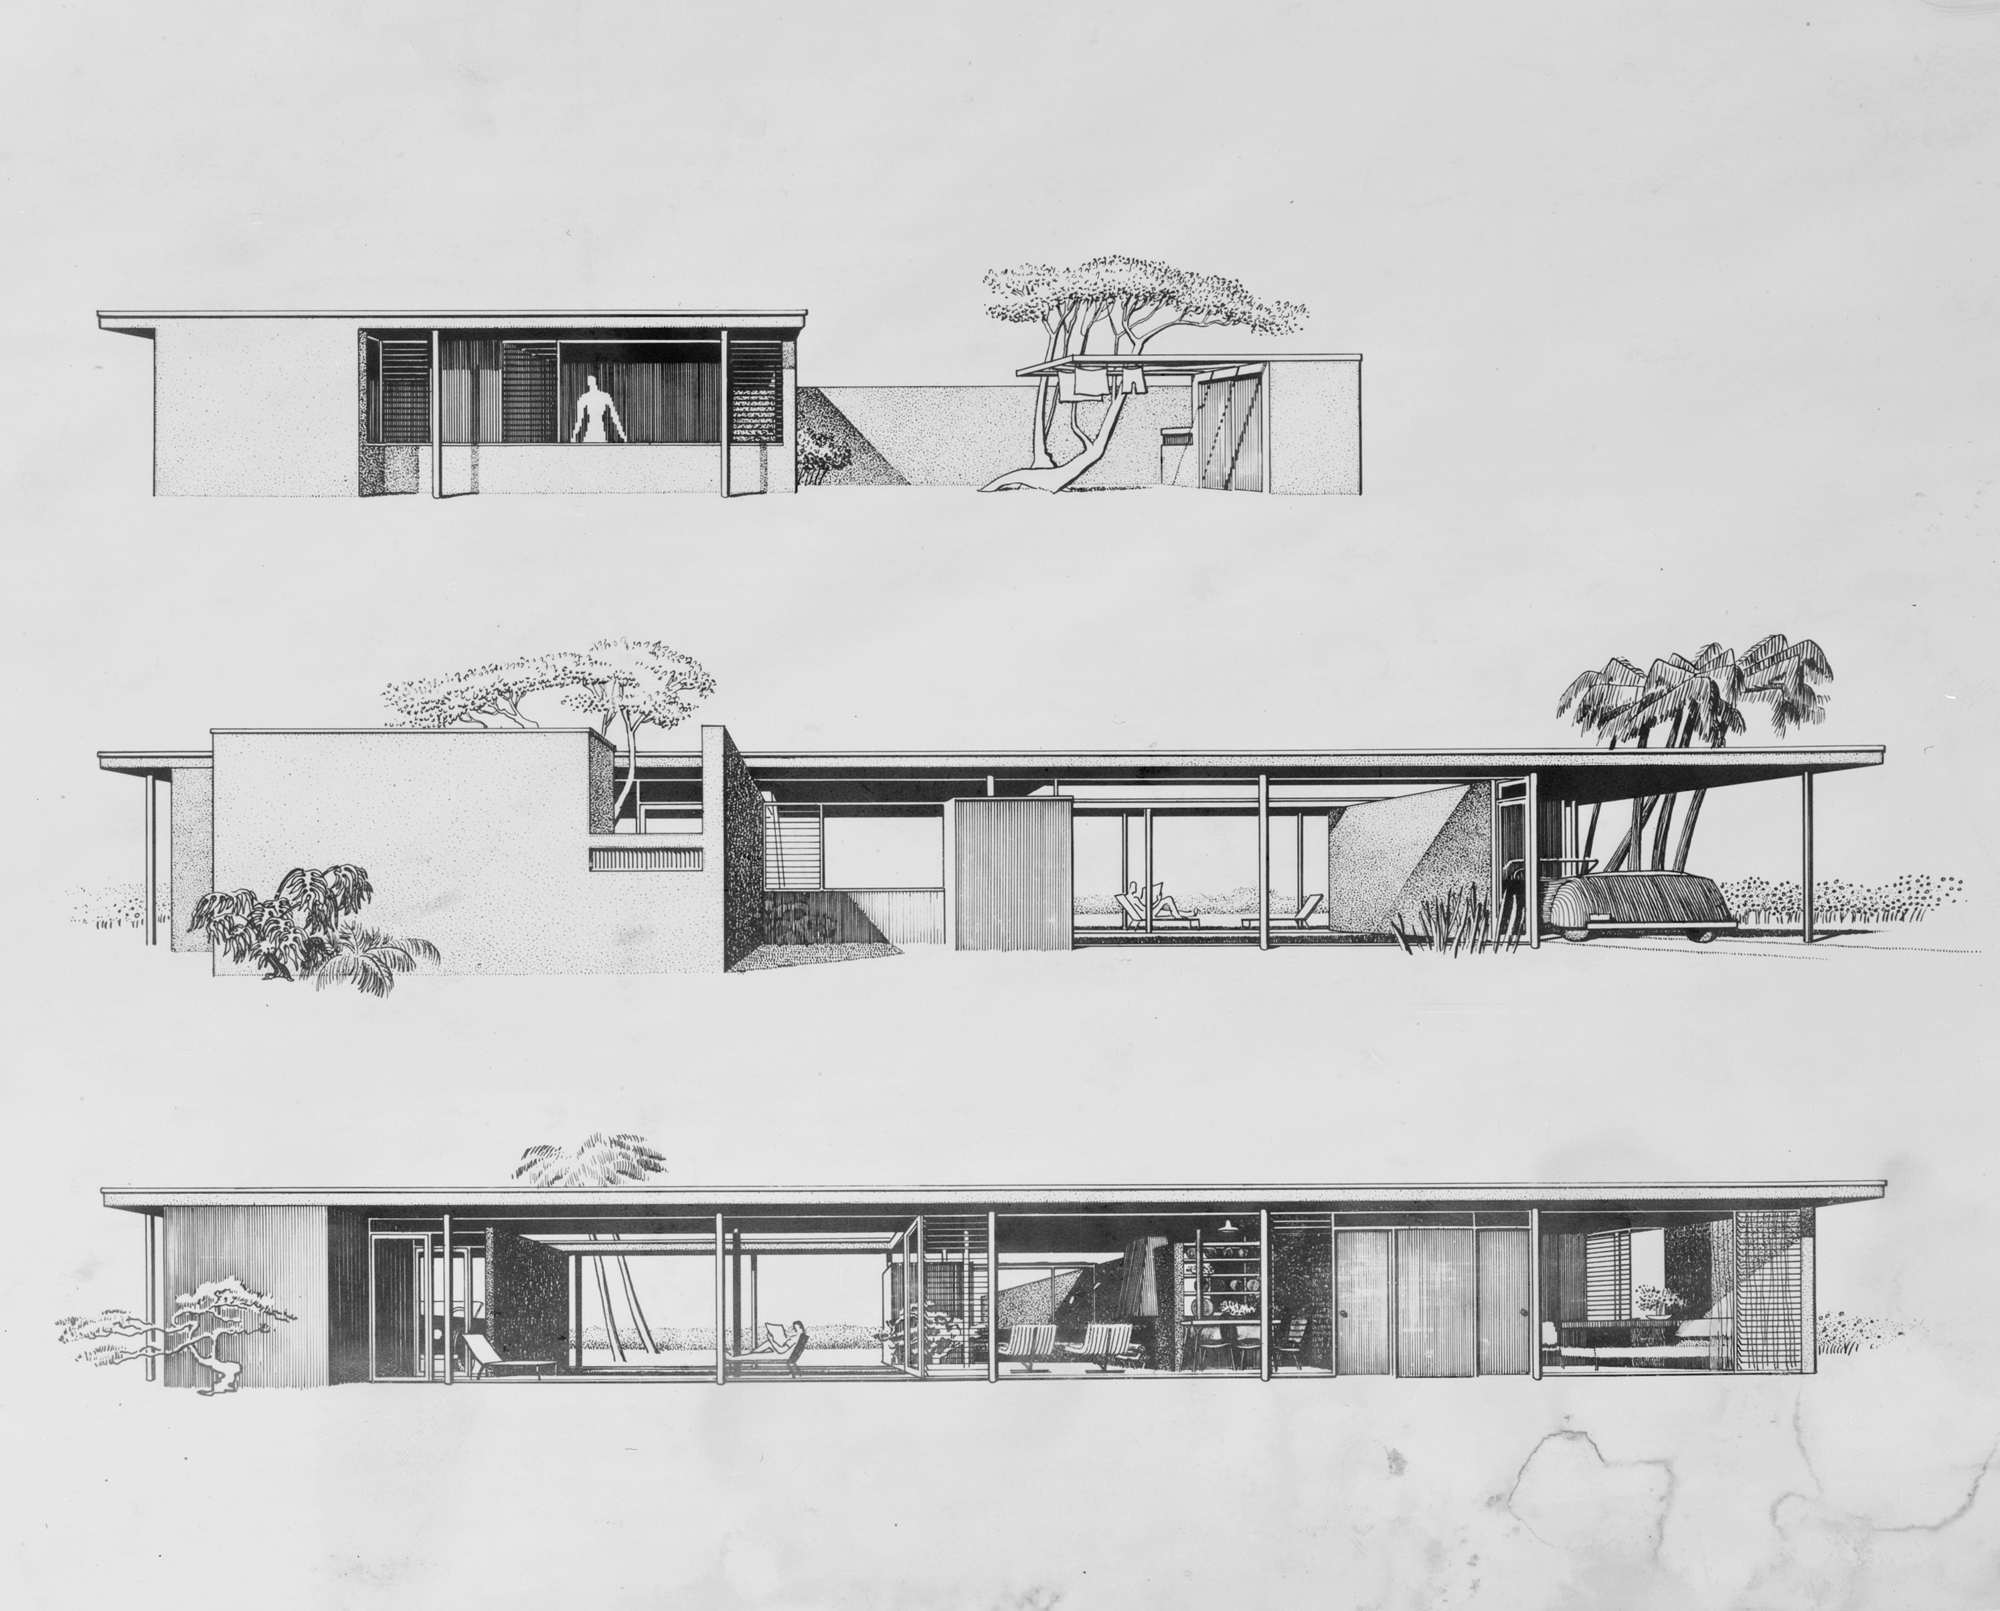 The Revere Quality Institute House was designed in 1948 by Paul Rudolph. Courtesy image